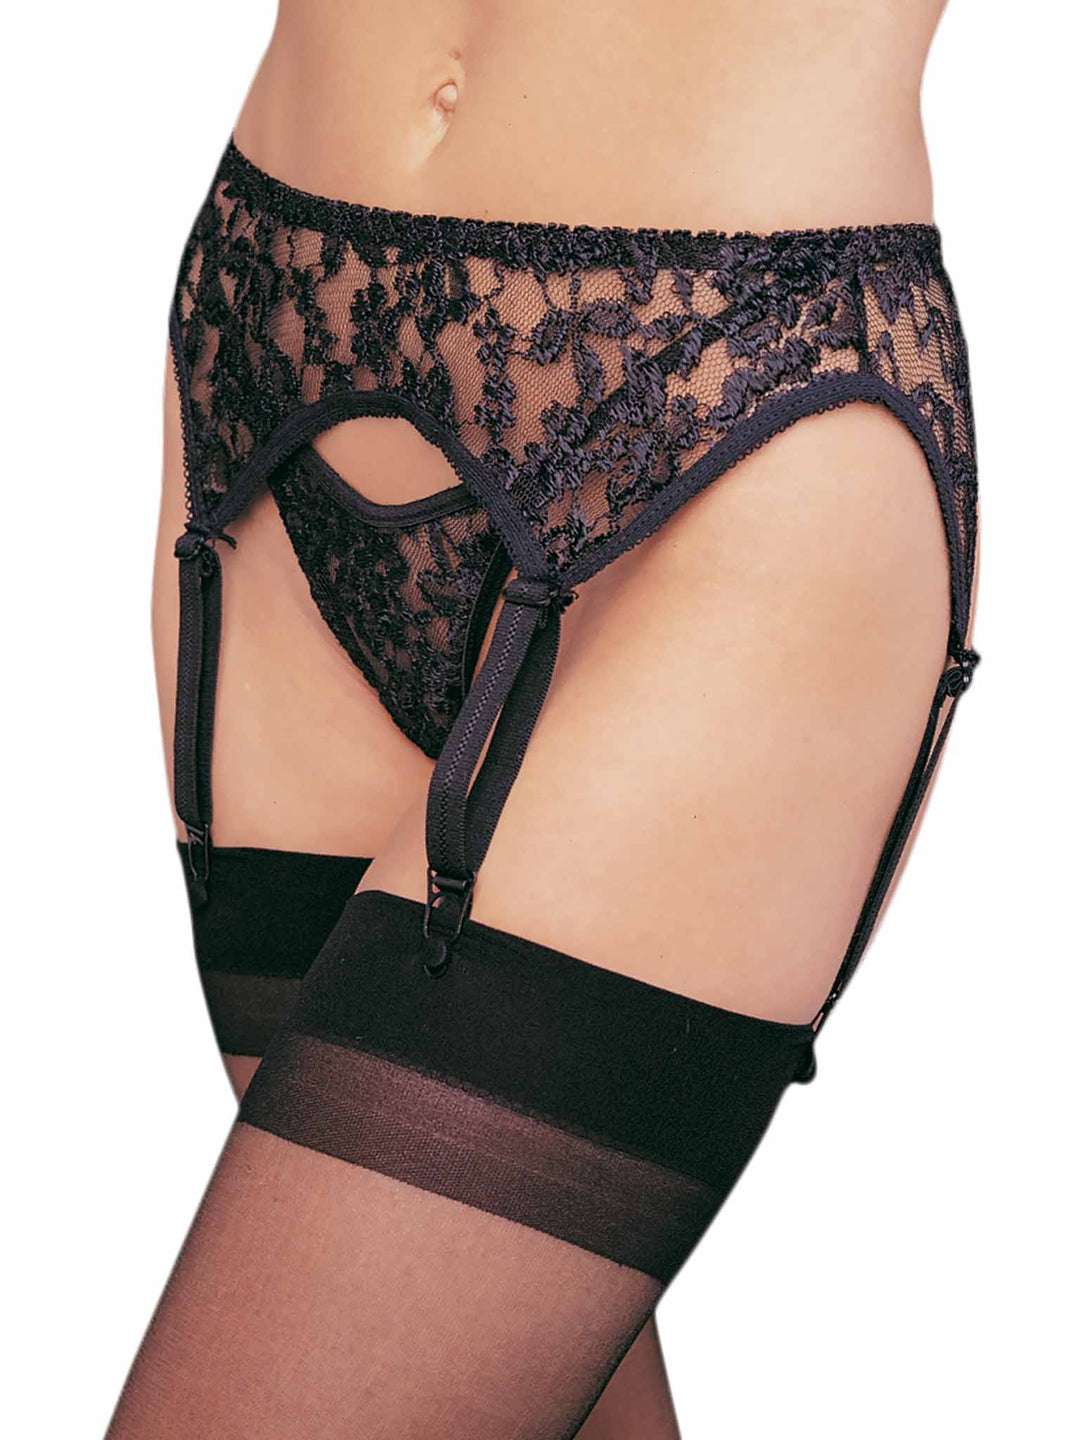 Image of a person wearing the Lace Garter Belt and Thong, available in one size and queen size.